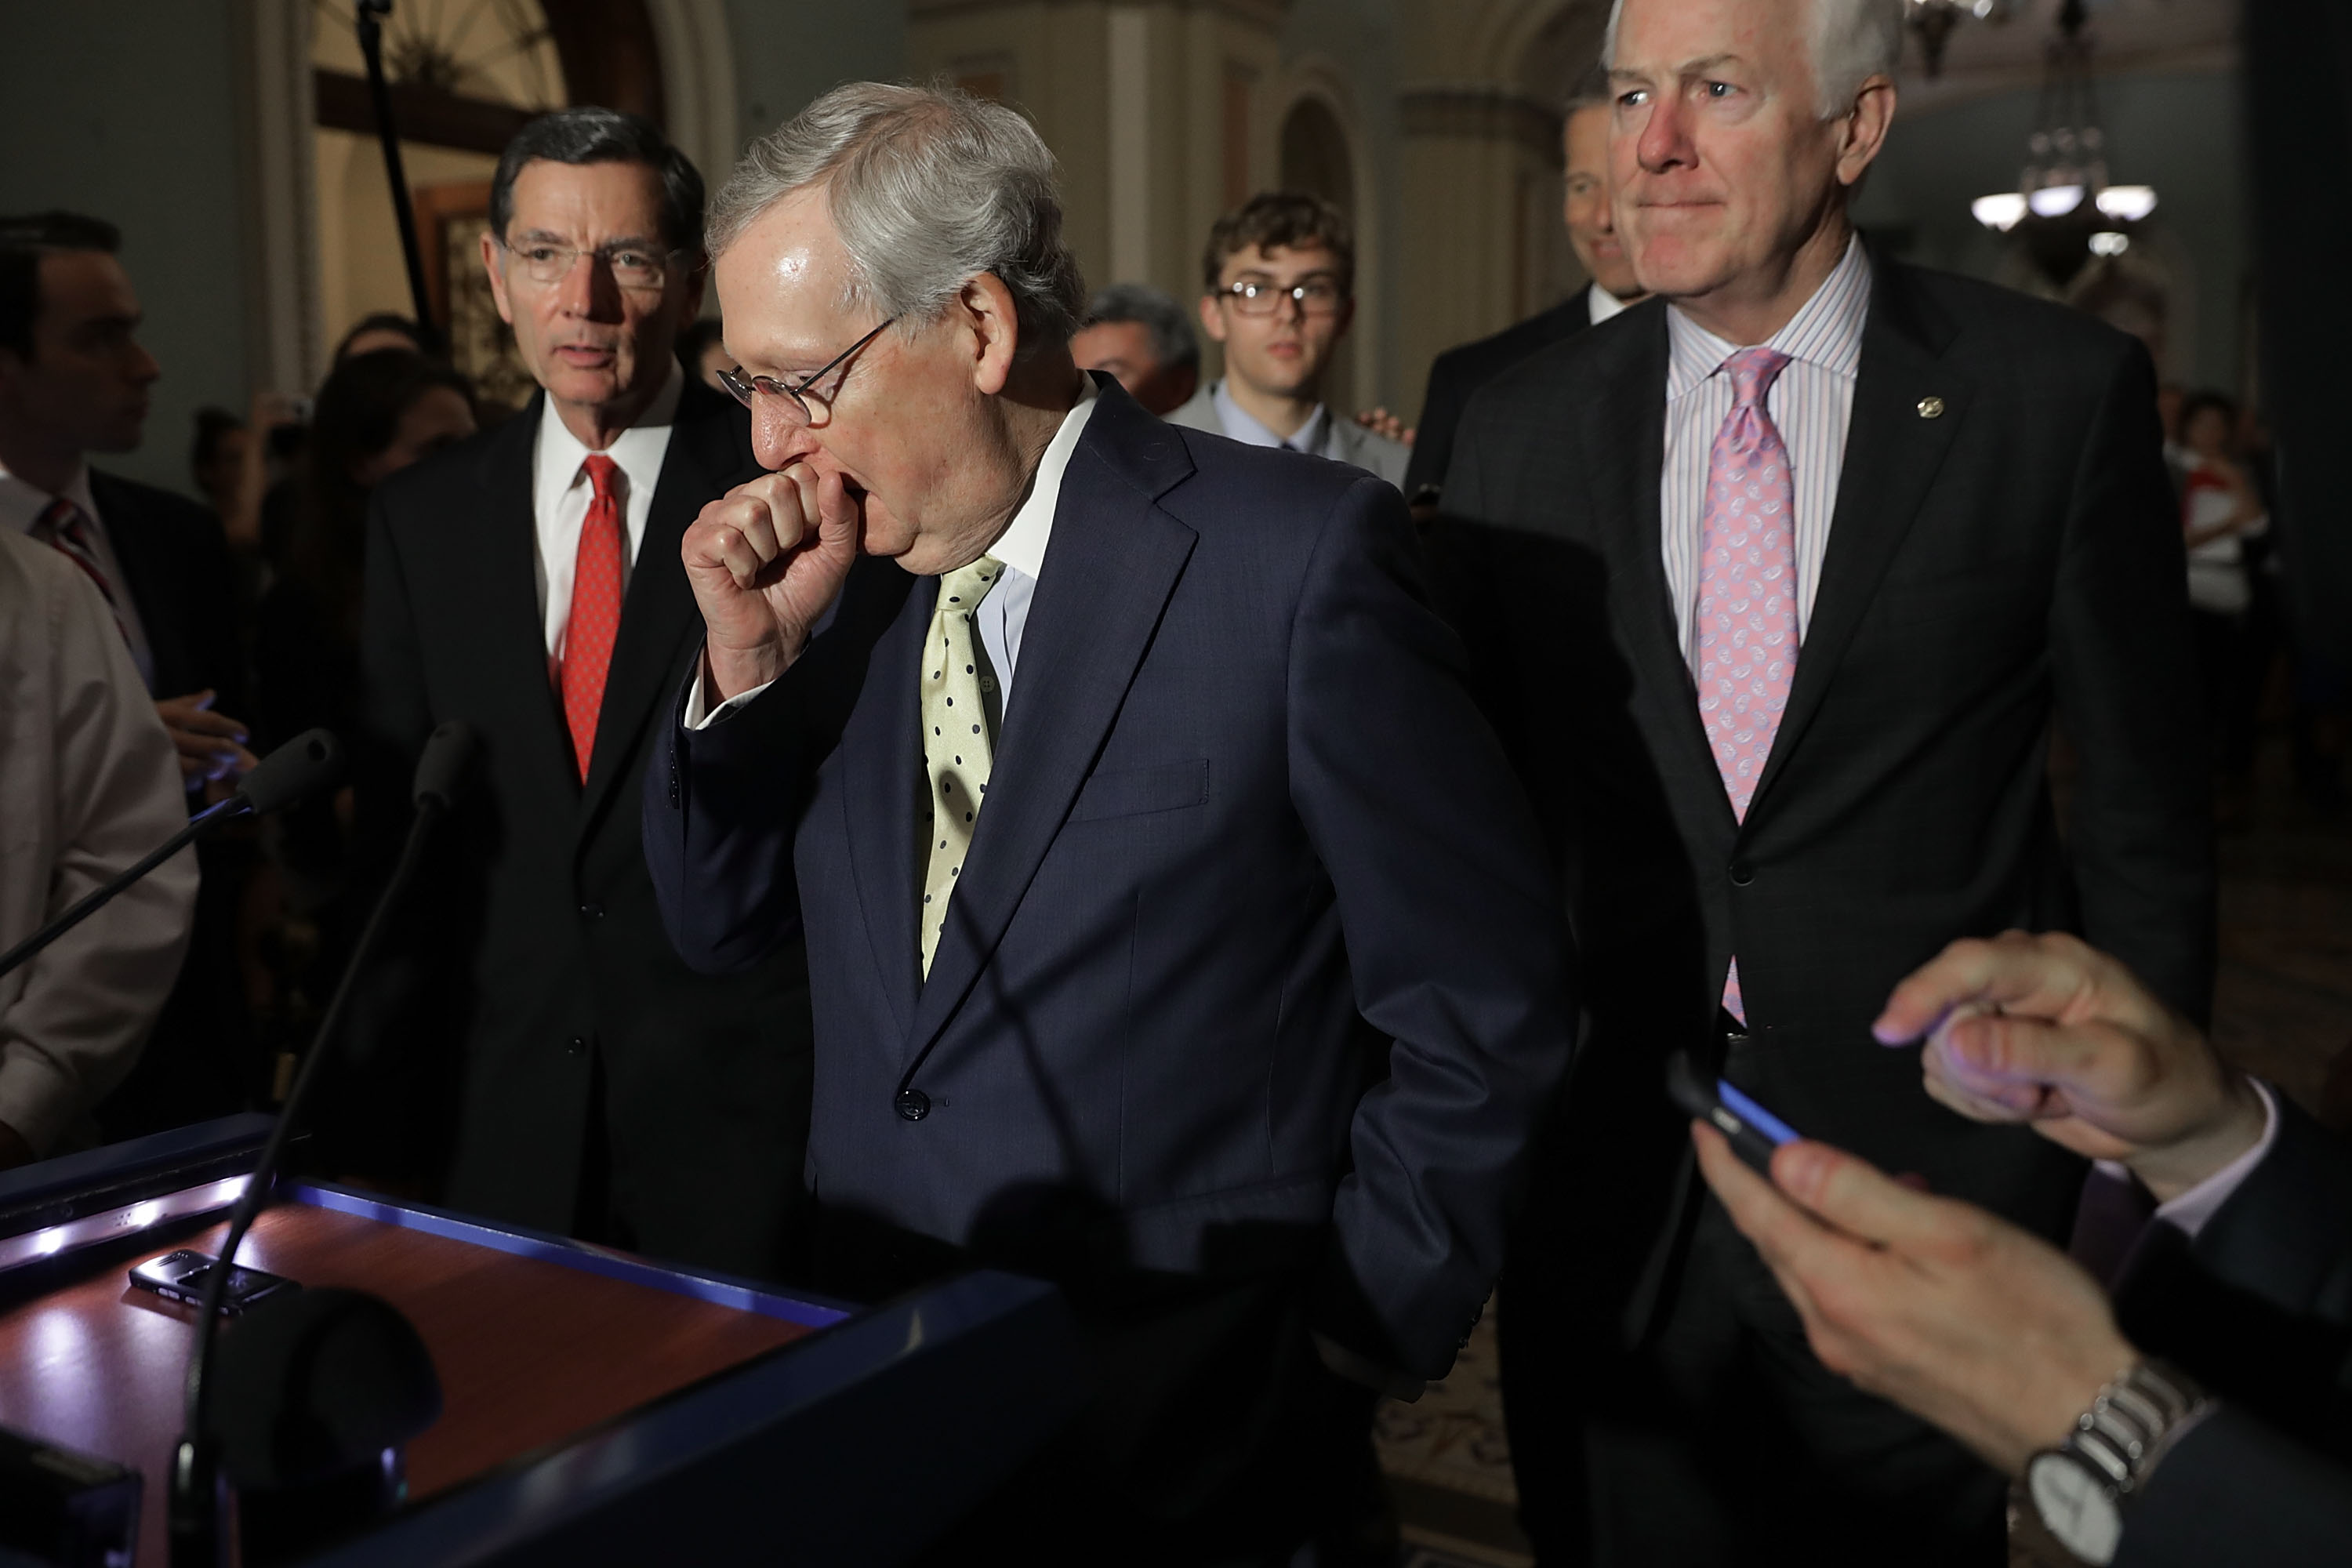 U.S. Senate Majority Leader Mitch McConnell (R-KY) (C) approaches the microphones before talking with reporters with Sen. John Barrasso (R-WY) (L) and Senate Majority Whip John Cornyn (R-TX) following the weekly GOP policy luncheon at the U.S. Capitol June 20, 2017 in Washington, D.C. (Chip Somodevilla&mdash;Getty Images)